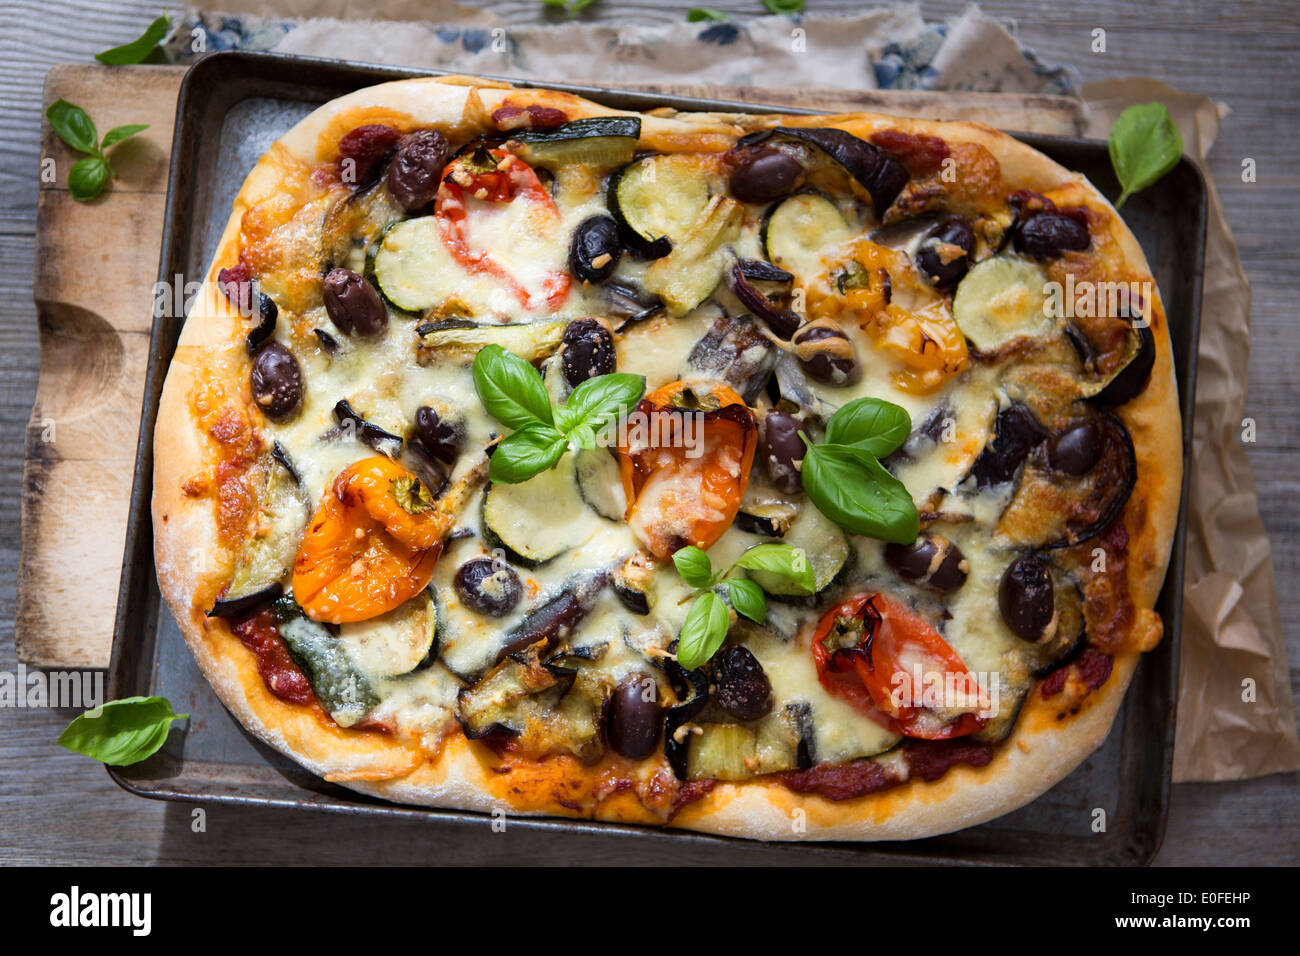 Homemade Roasted Vegetable Pizza with Olives, Basil and Peppers Stock Photo